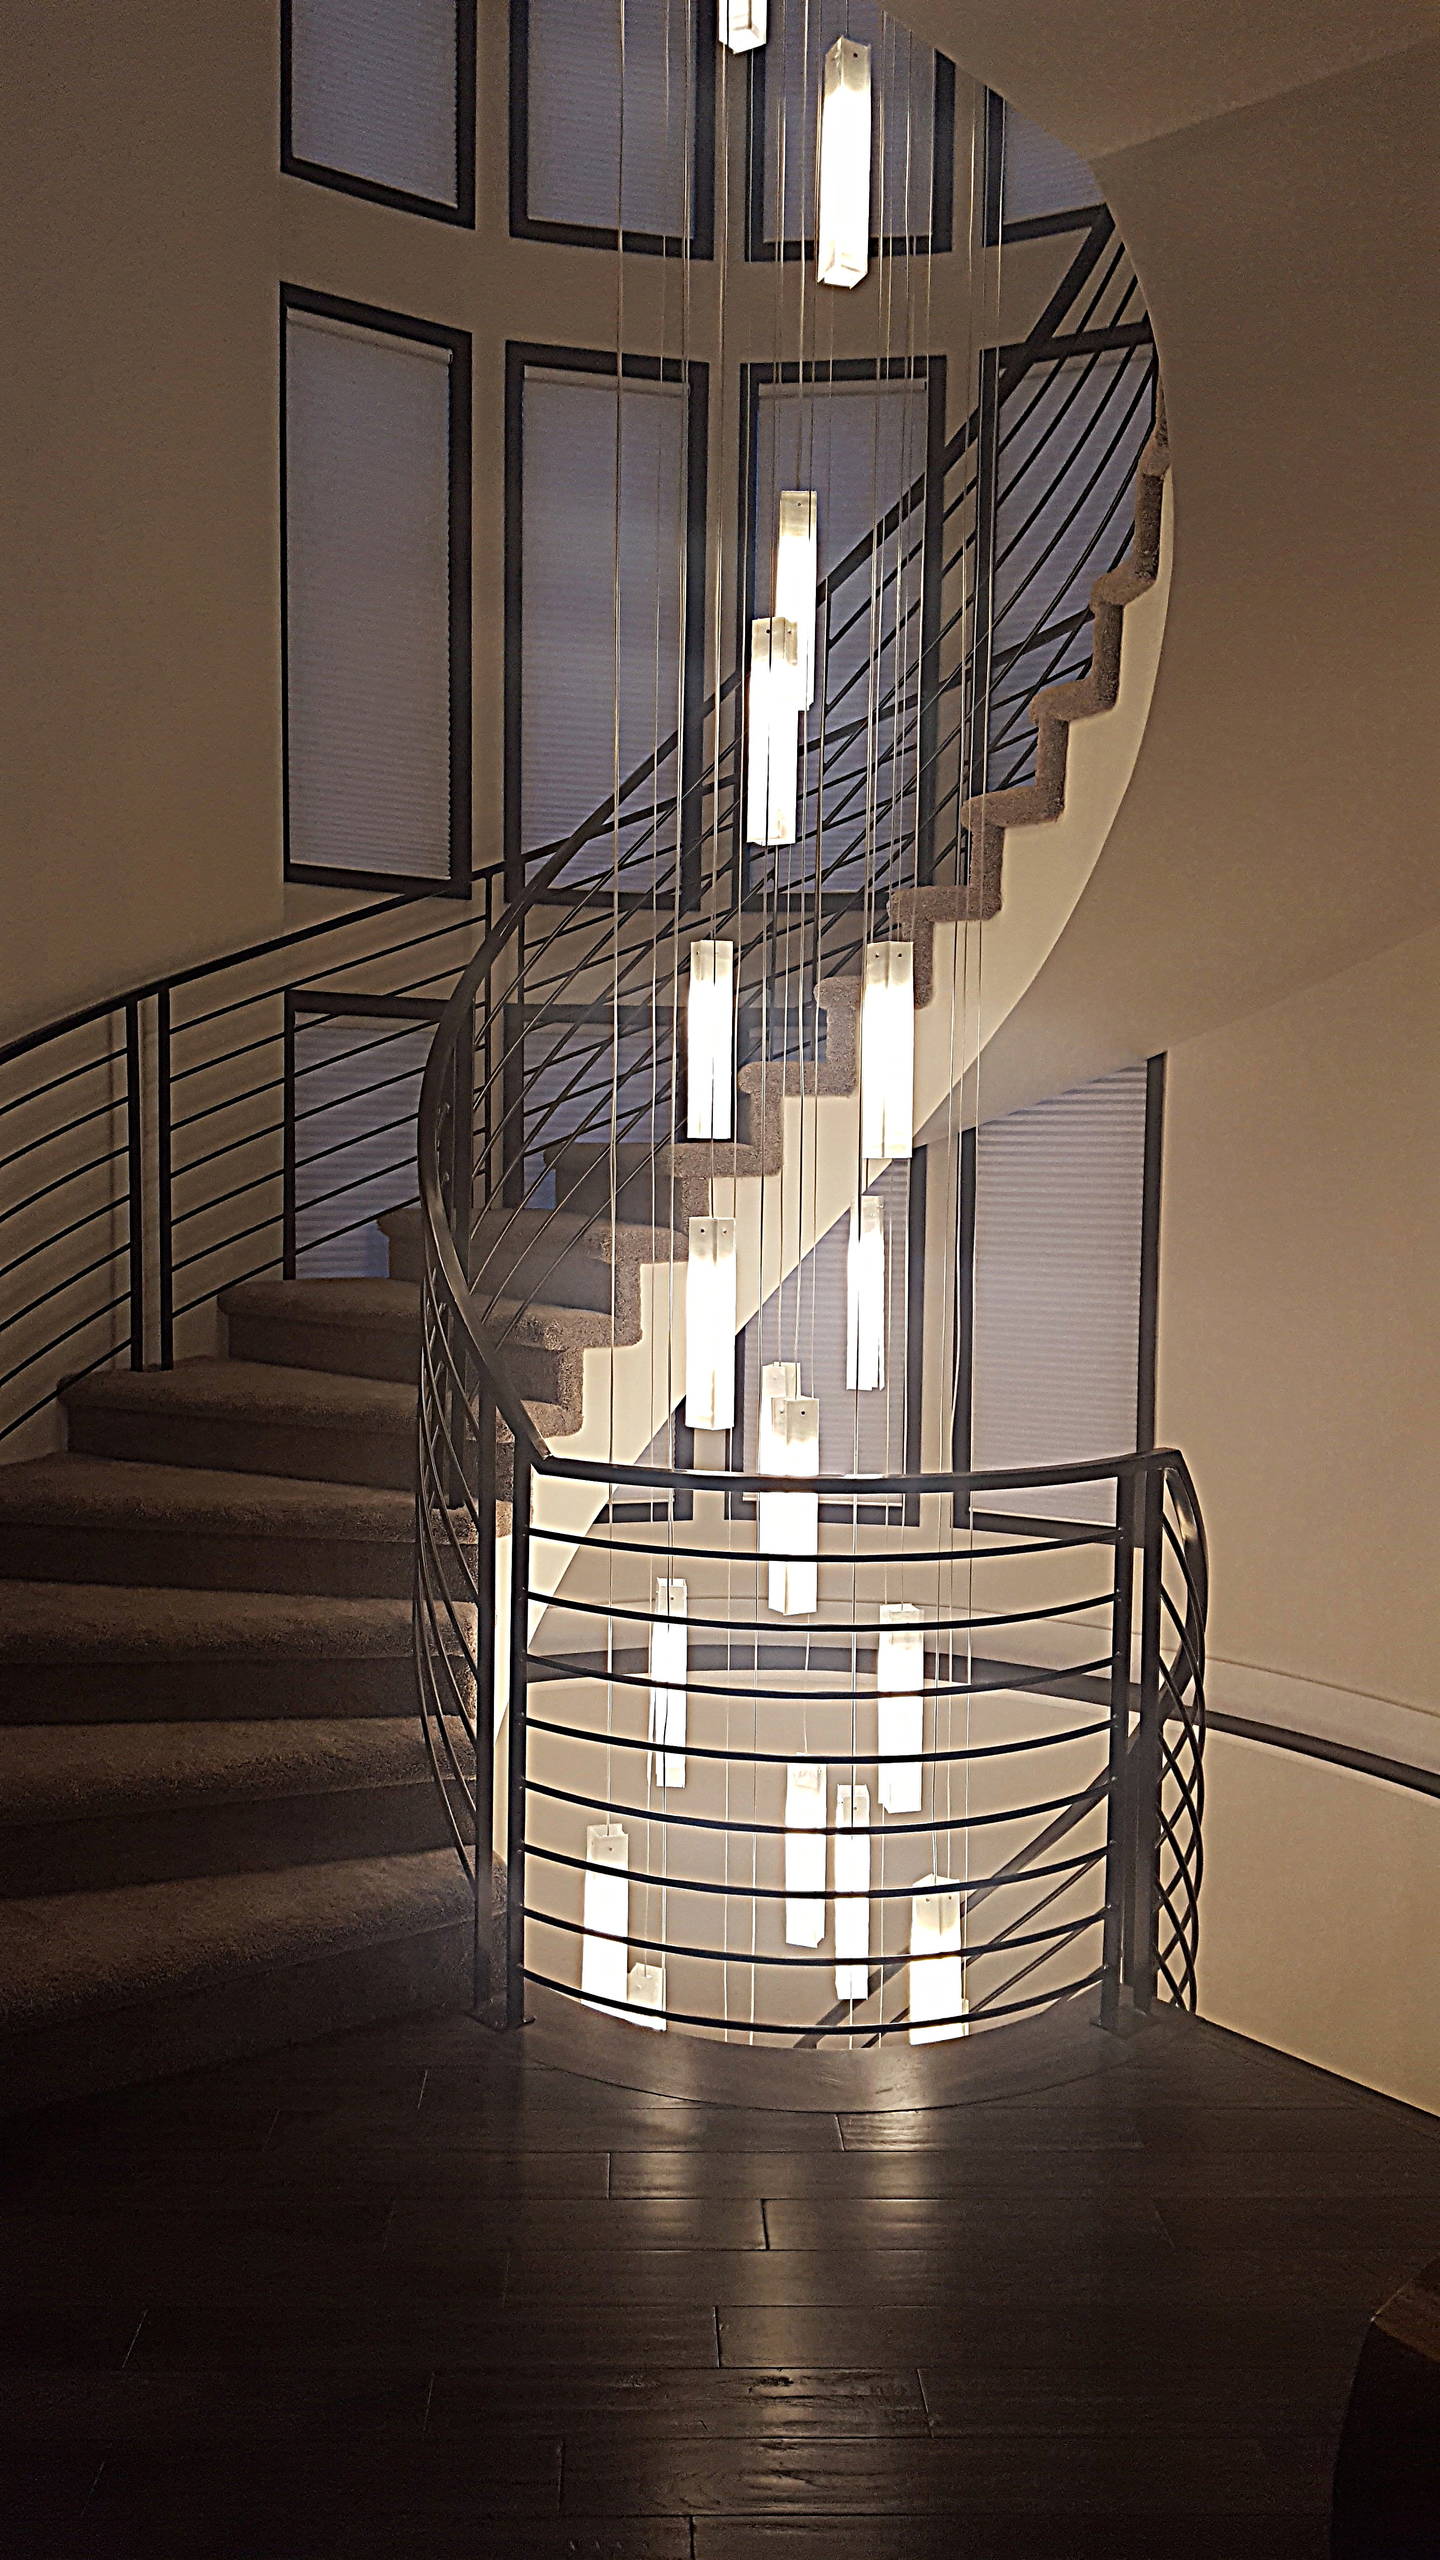 CONTEMPORARY TWO STORY FOYER CHANDELIER,MODERN ENTRY CHANDELIER FOR HIGH  CEILING - Contemporary - Staircase - Miami - by Galilee Lighting | Houzz